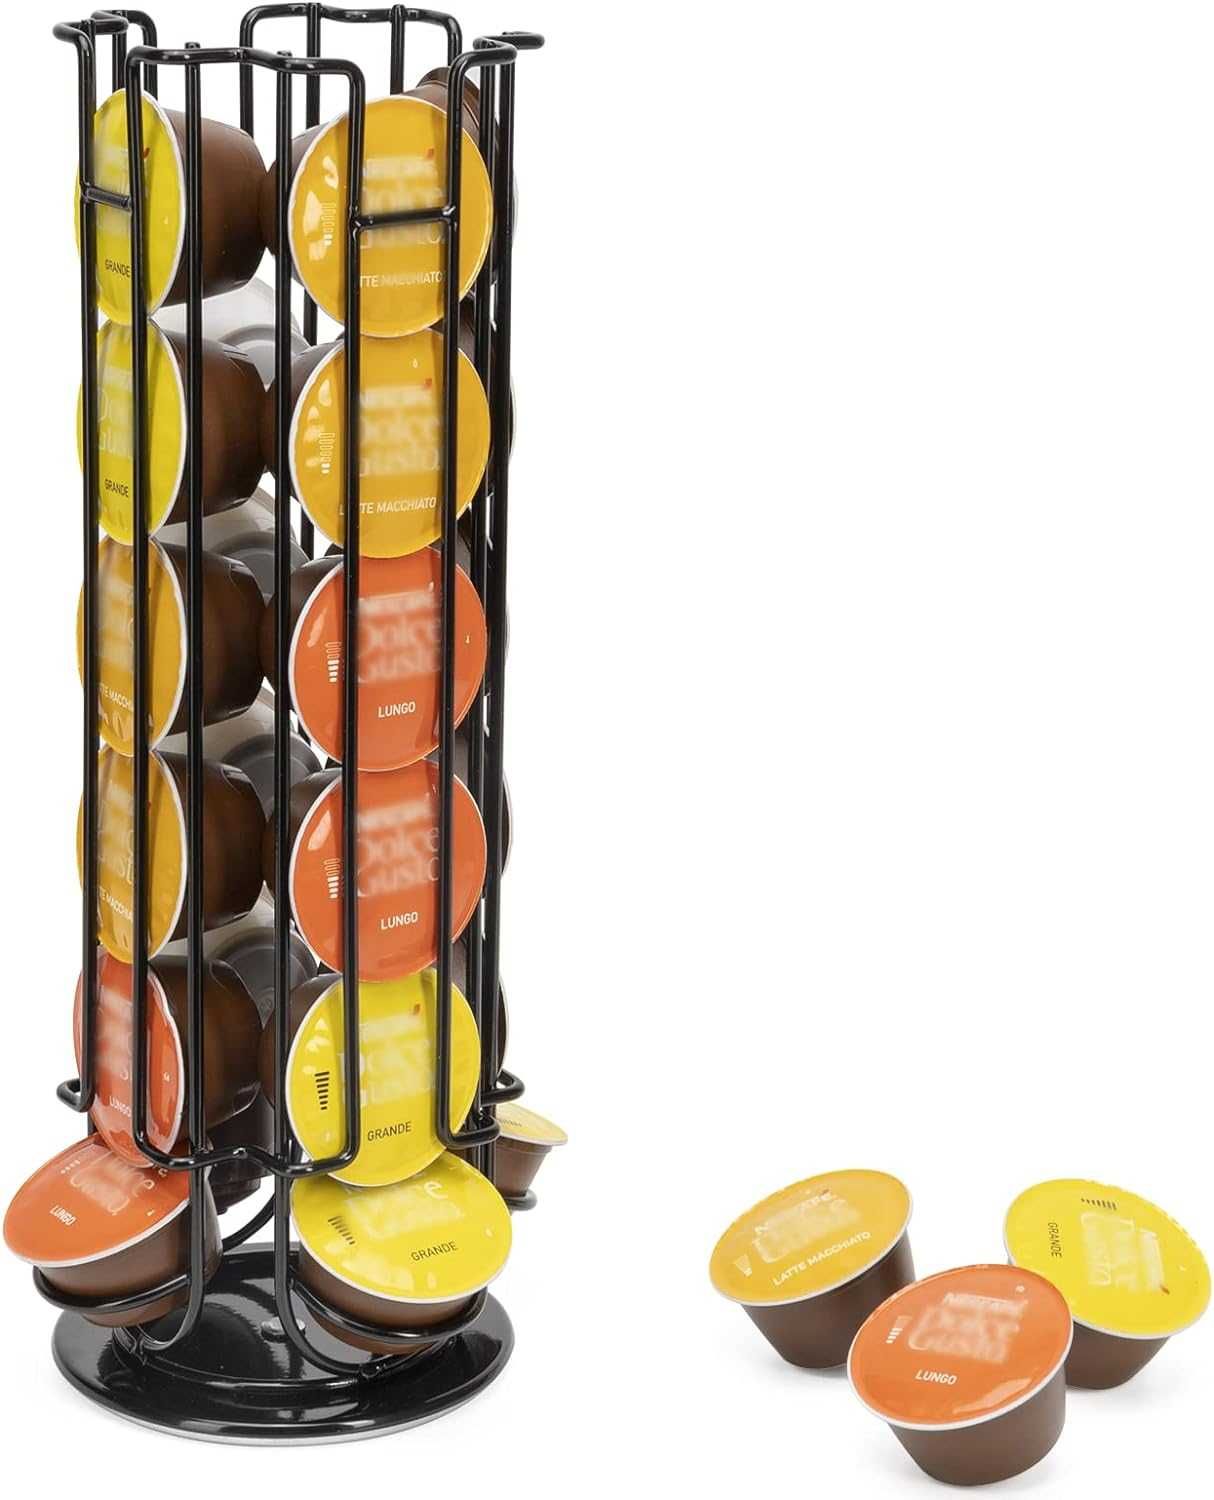 Organizator stand capsule Dolce Gusto